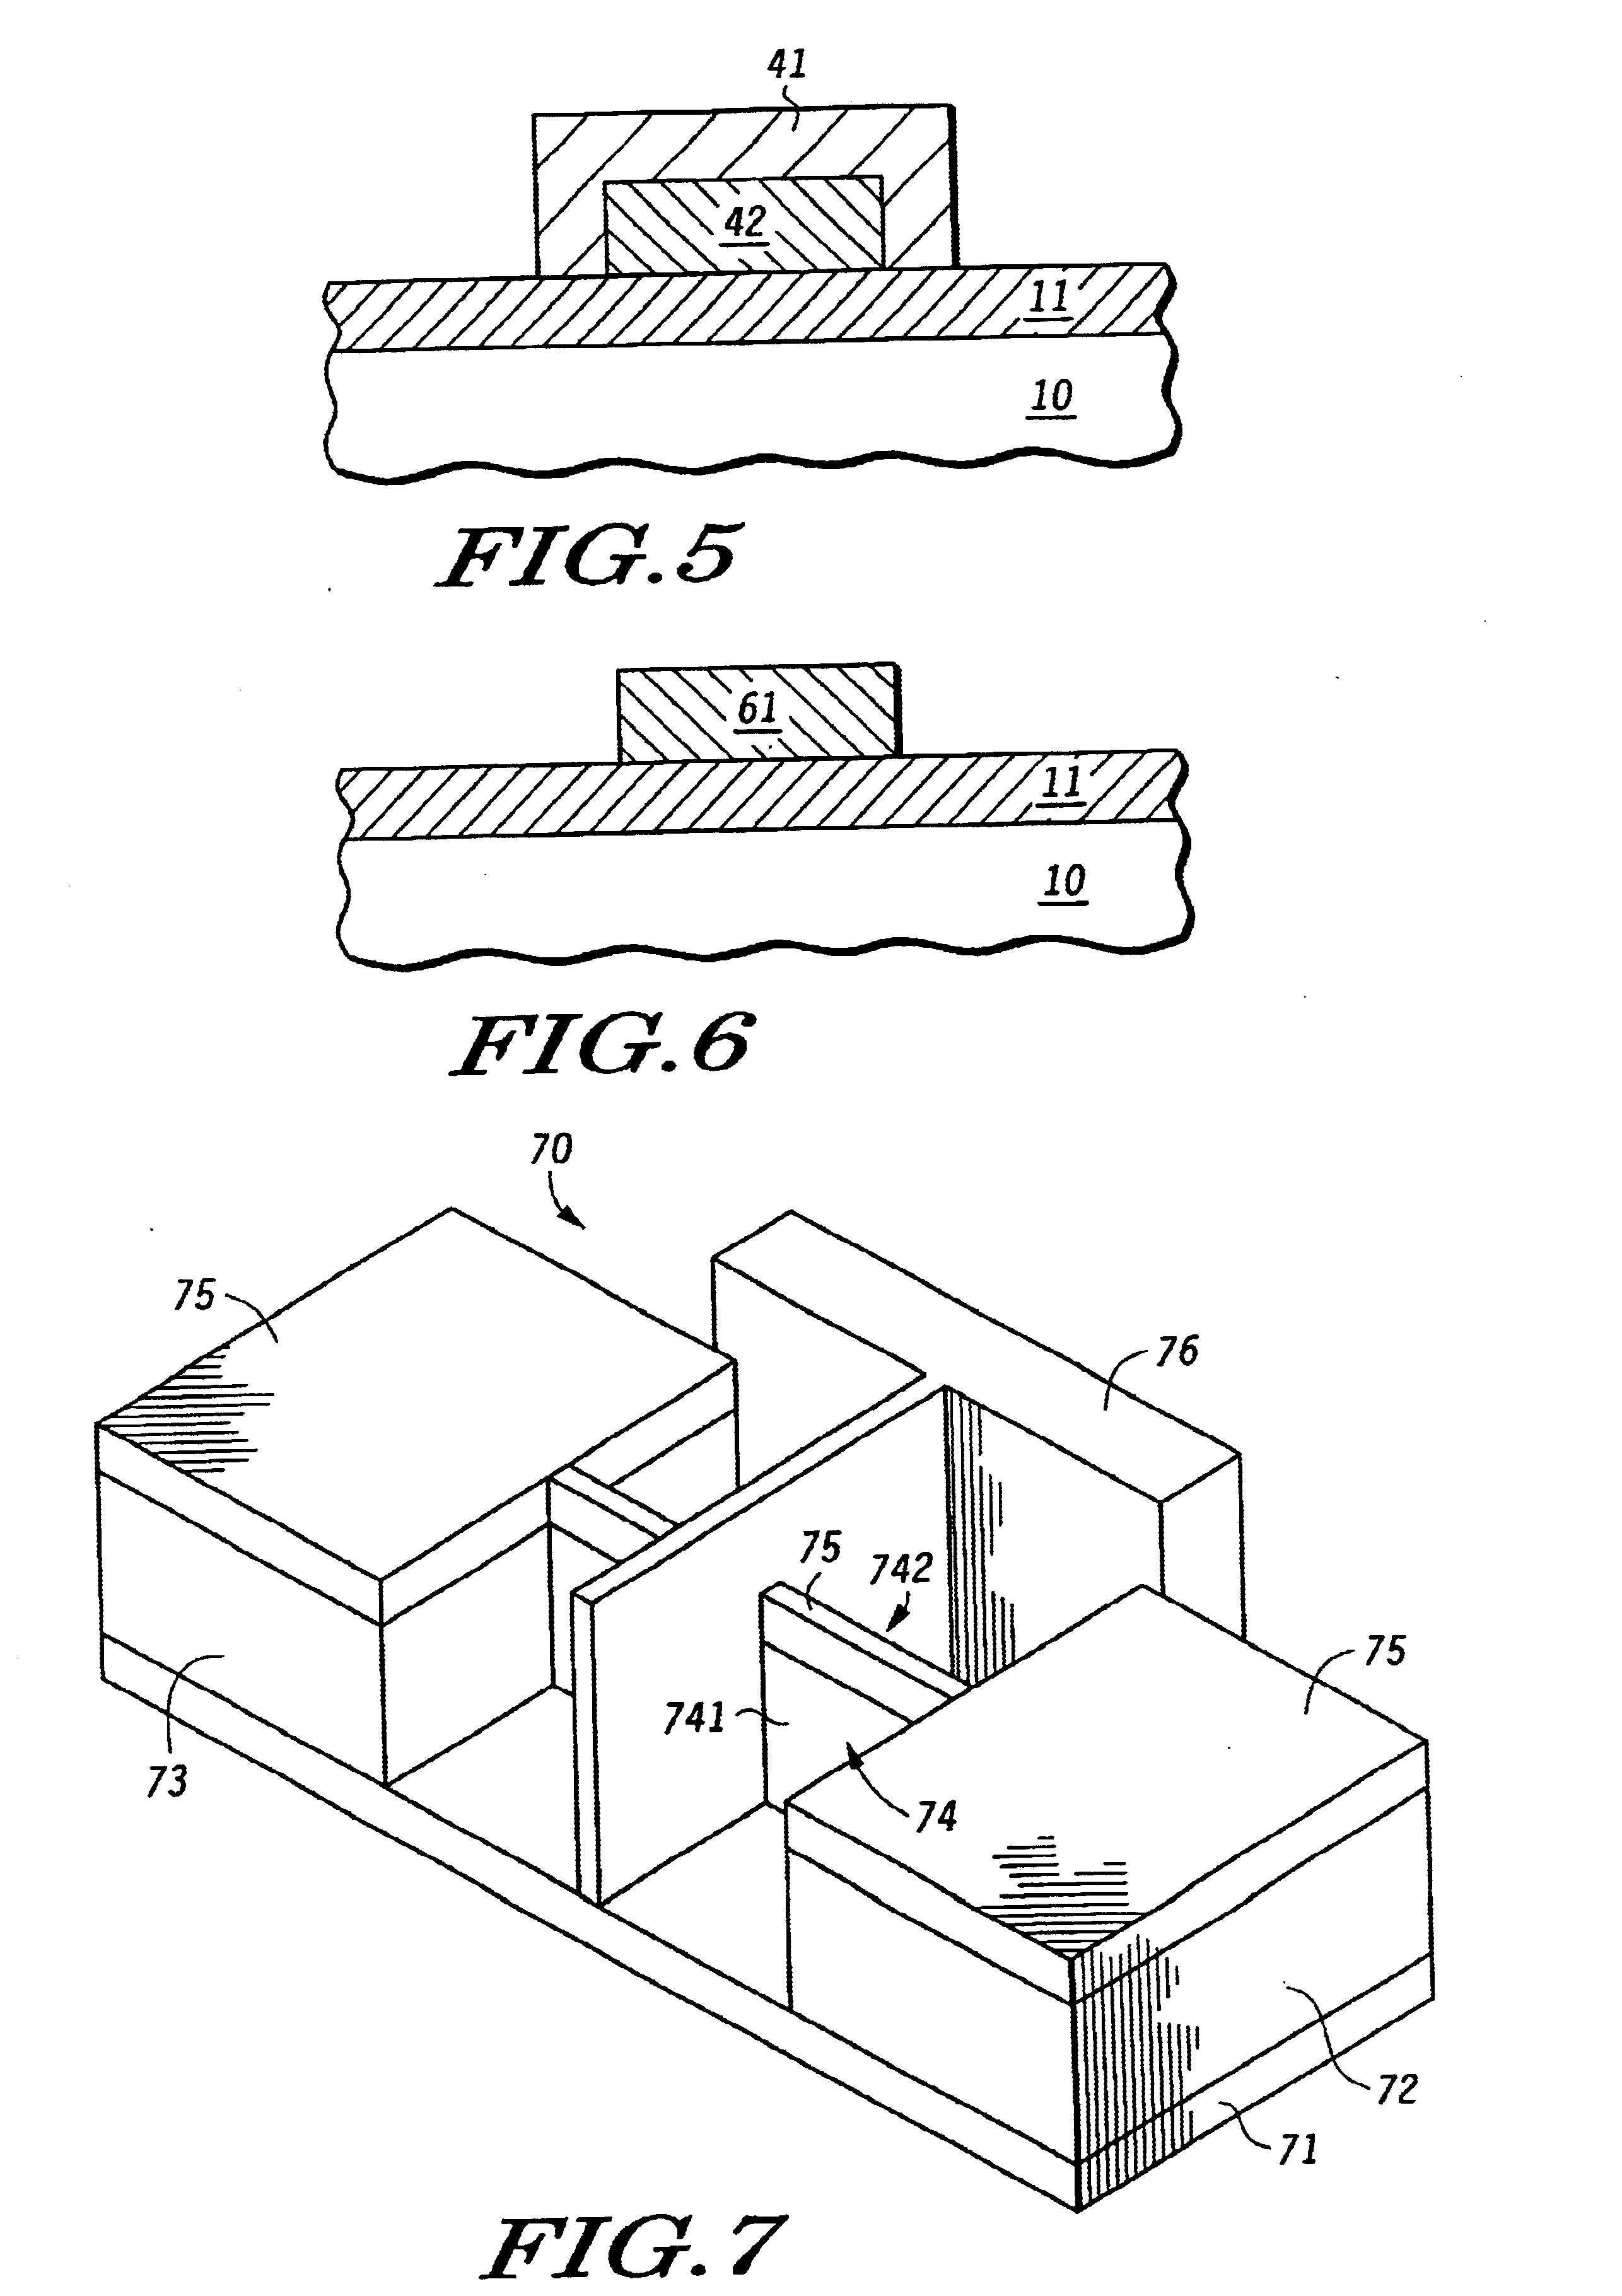 Method for forming an electronic structure using etch